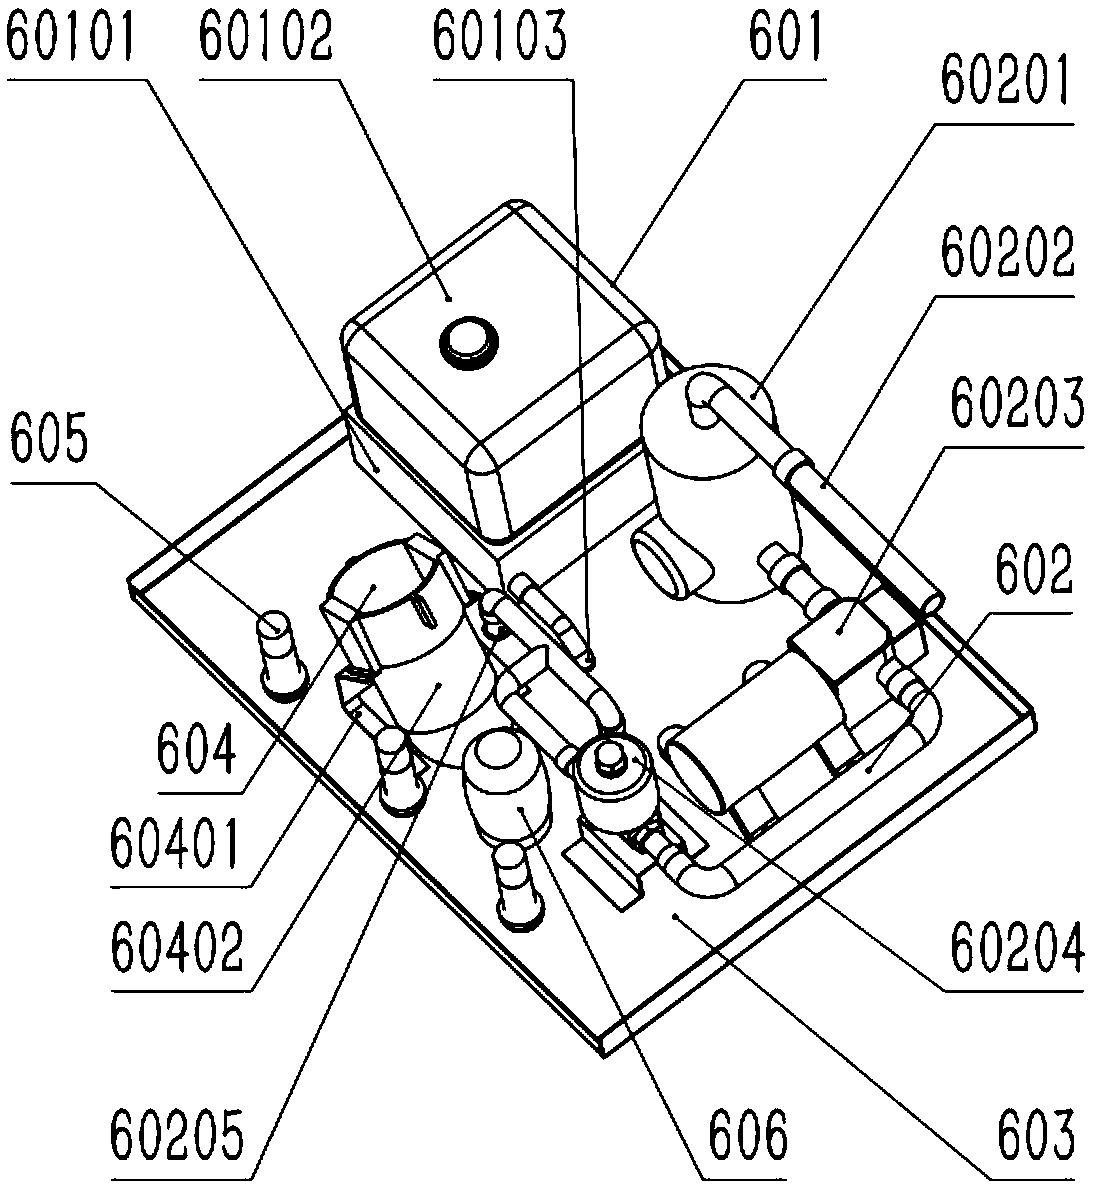 Hand washer capable of detecting bacteria and method of using the same